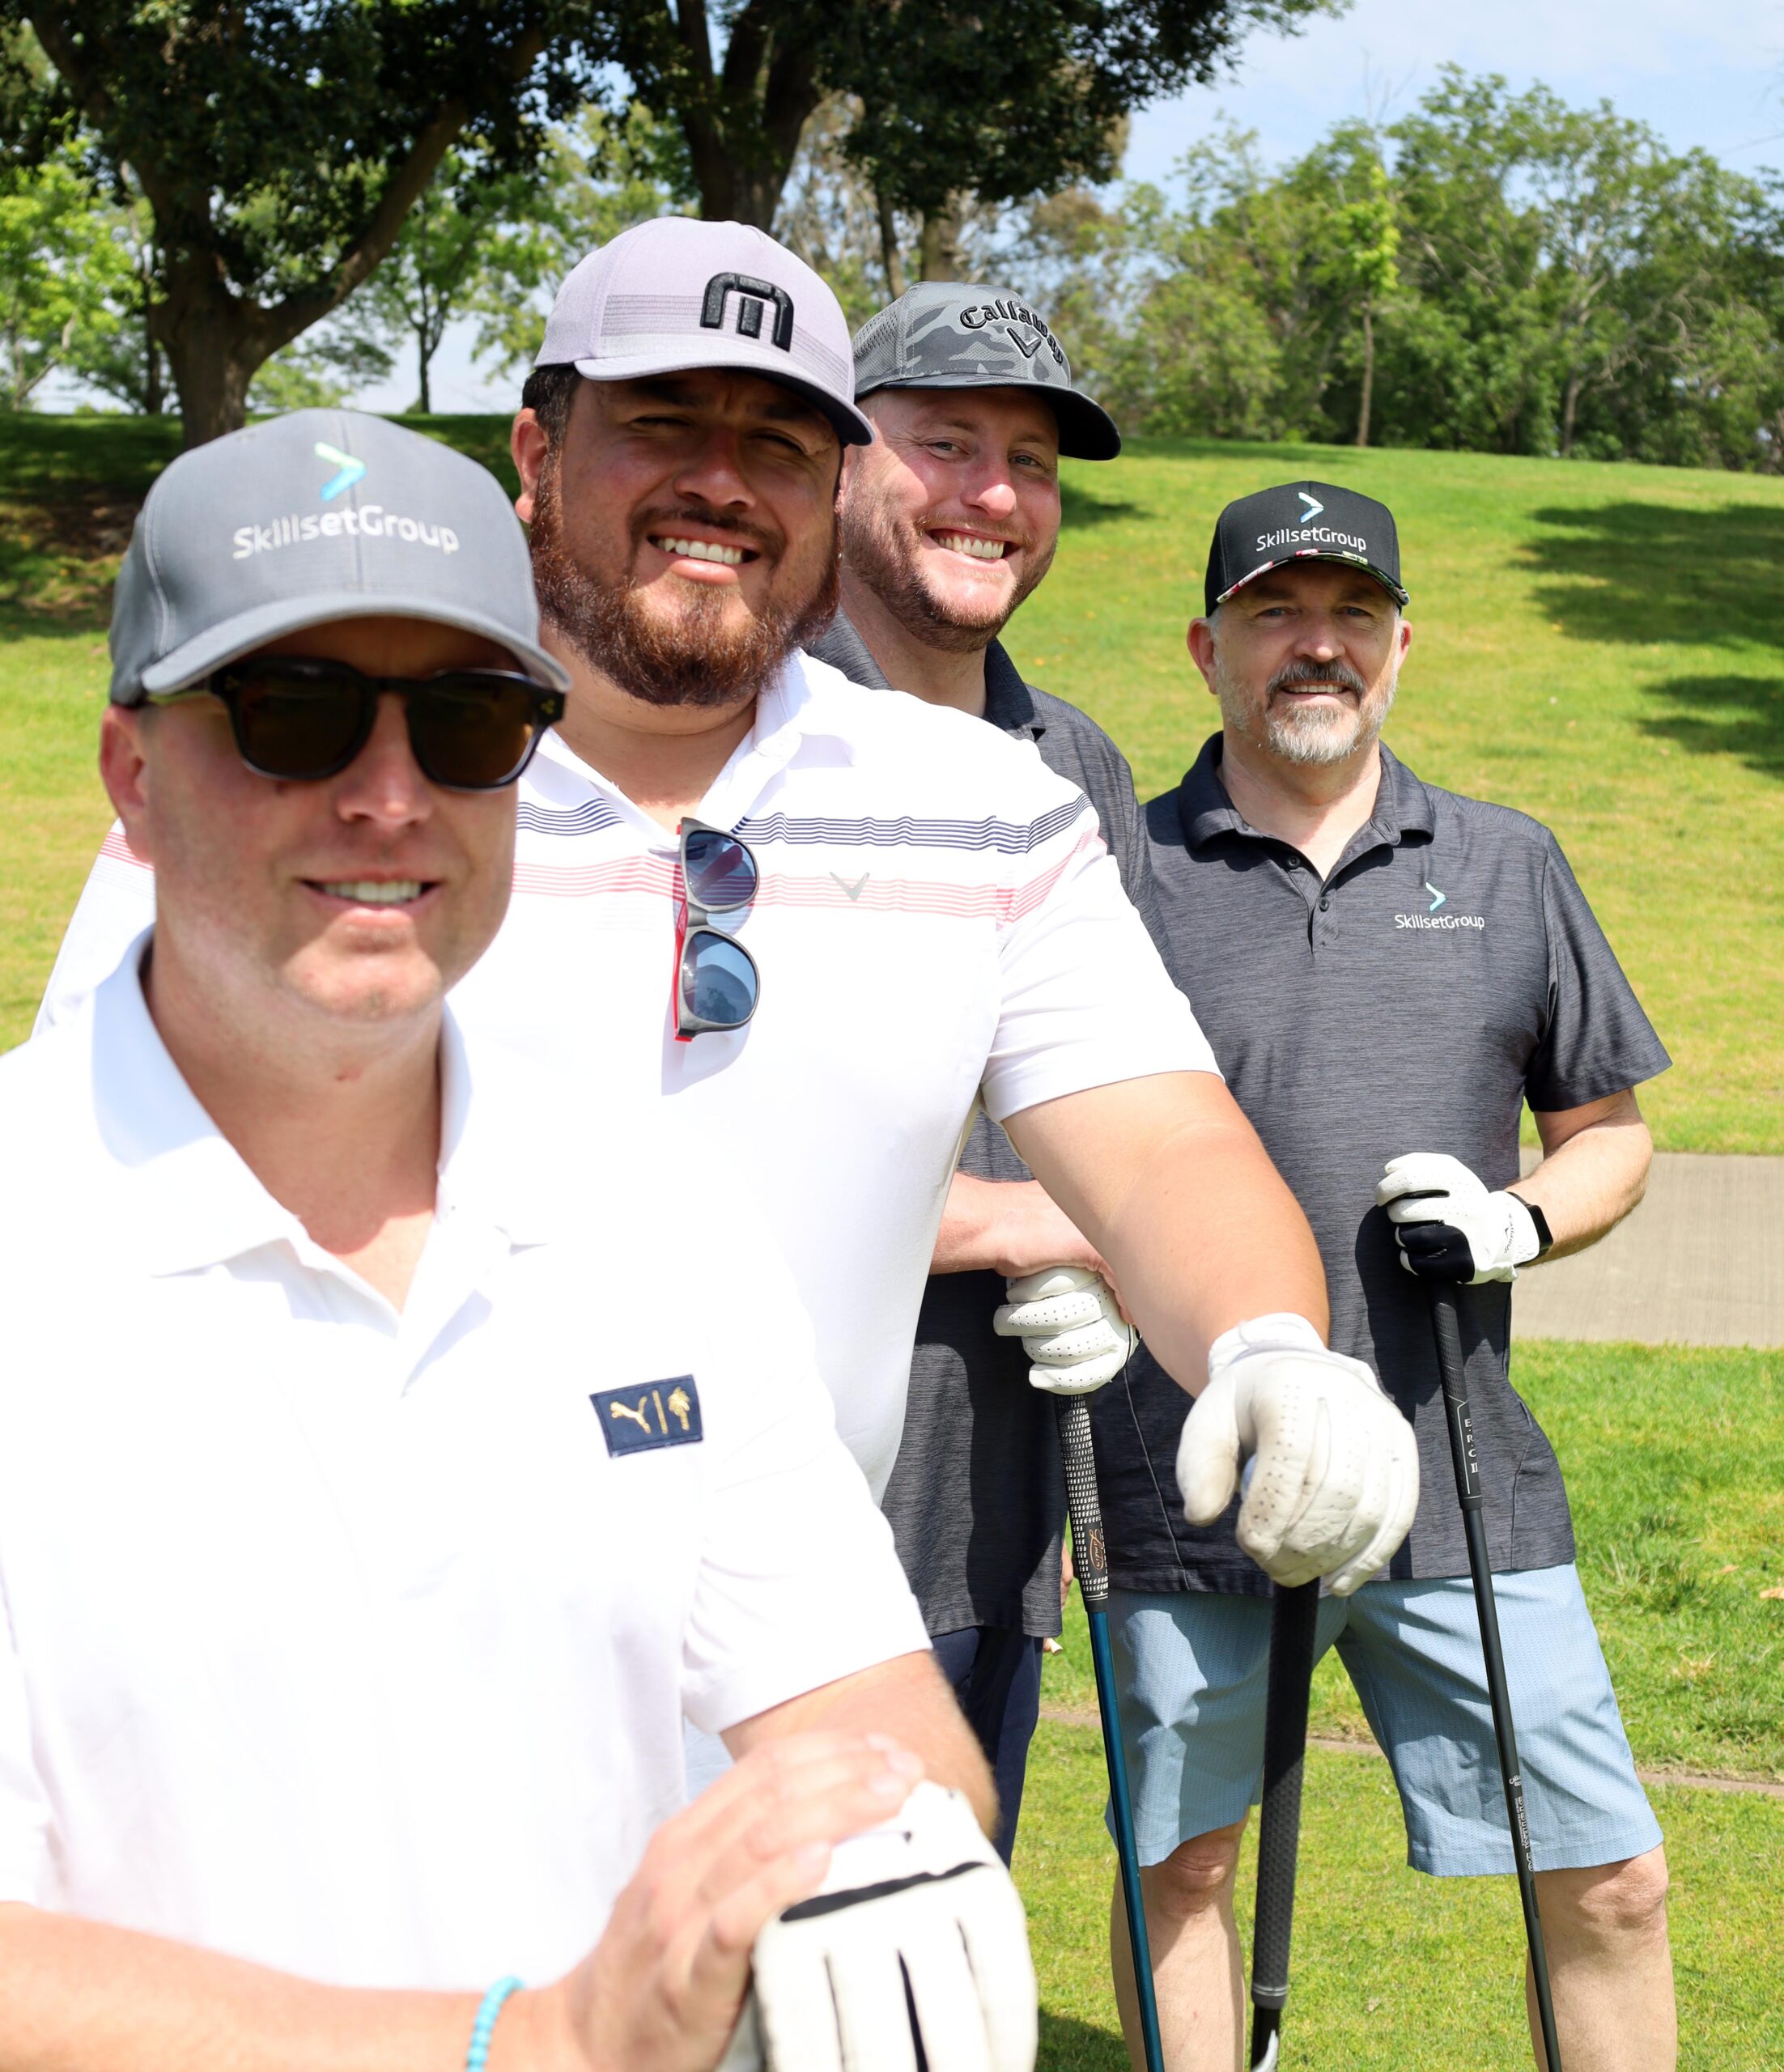 The SkillsetGroup executive team came out to support the Paramount Chamber of Commerce at their 2023 tournament at Los Coyotes country club. From front to back are CEO Clint Armstrong, CMO Jose Baca, Sales VP Dennis Avery and CFO Alex Henderson.